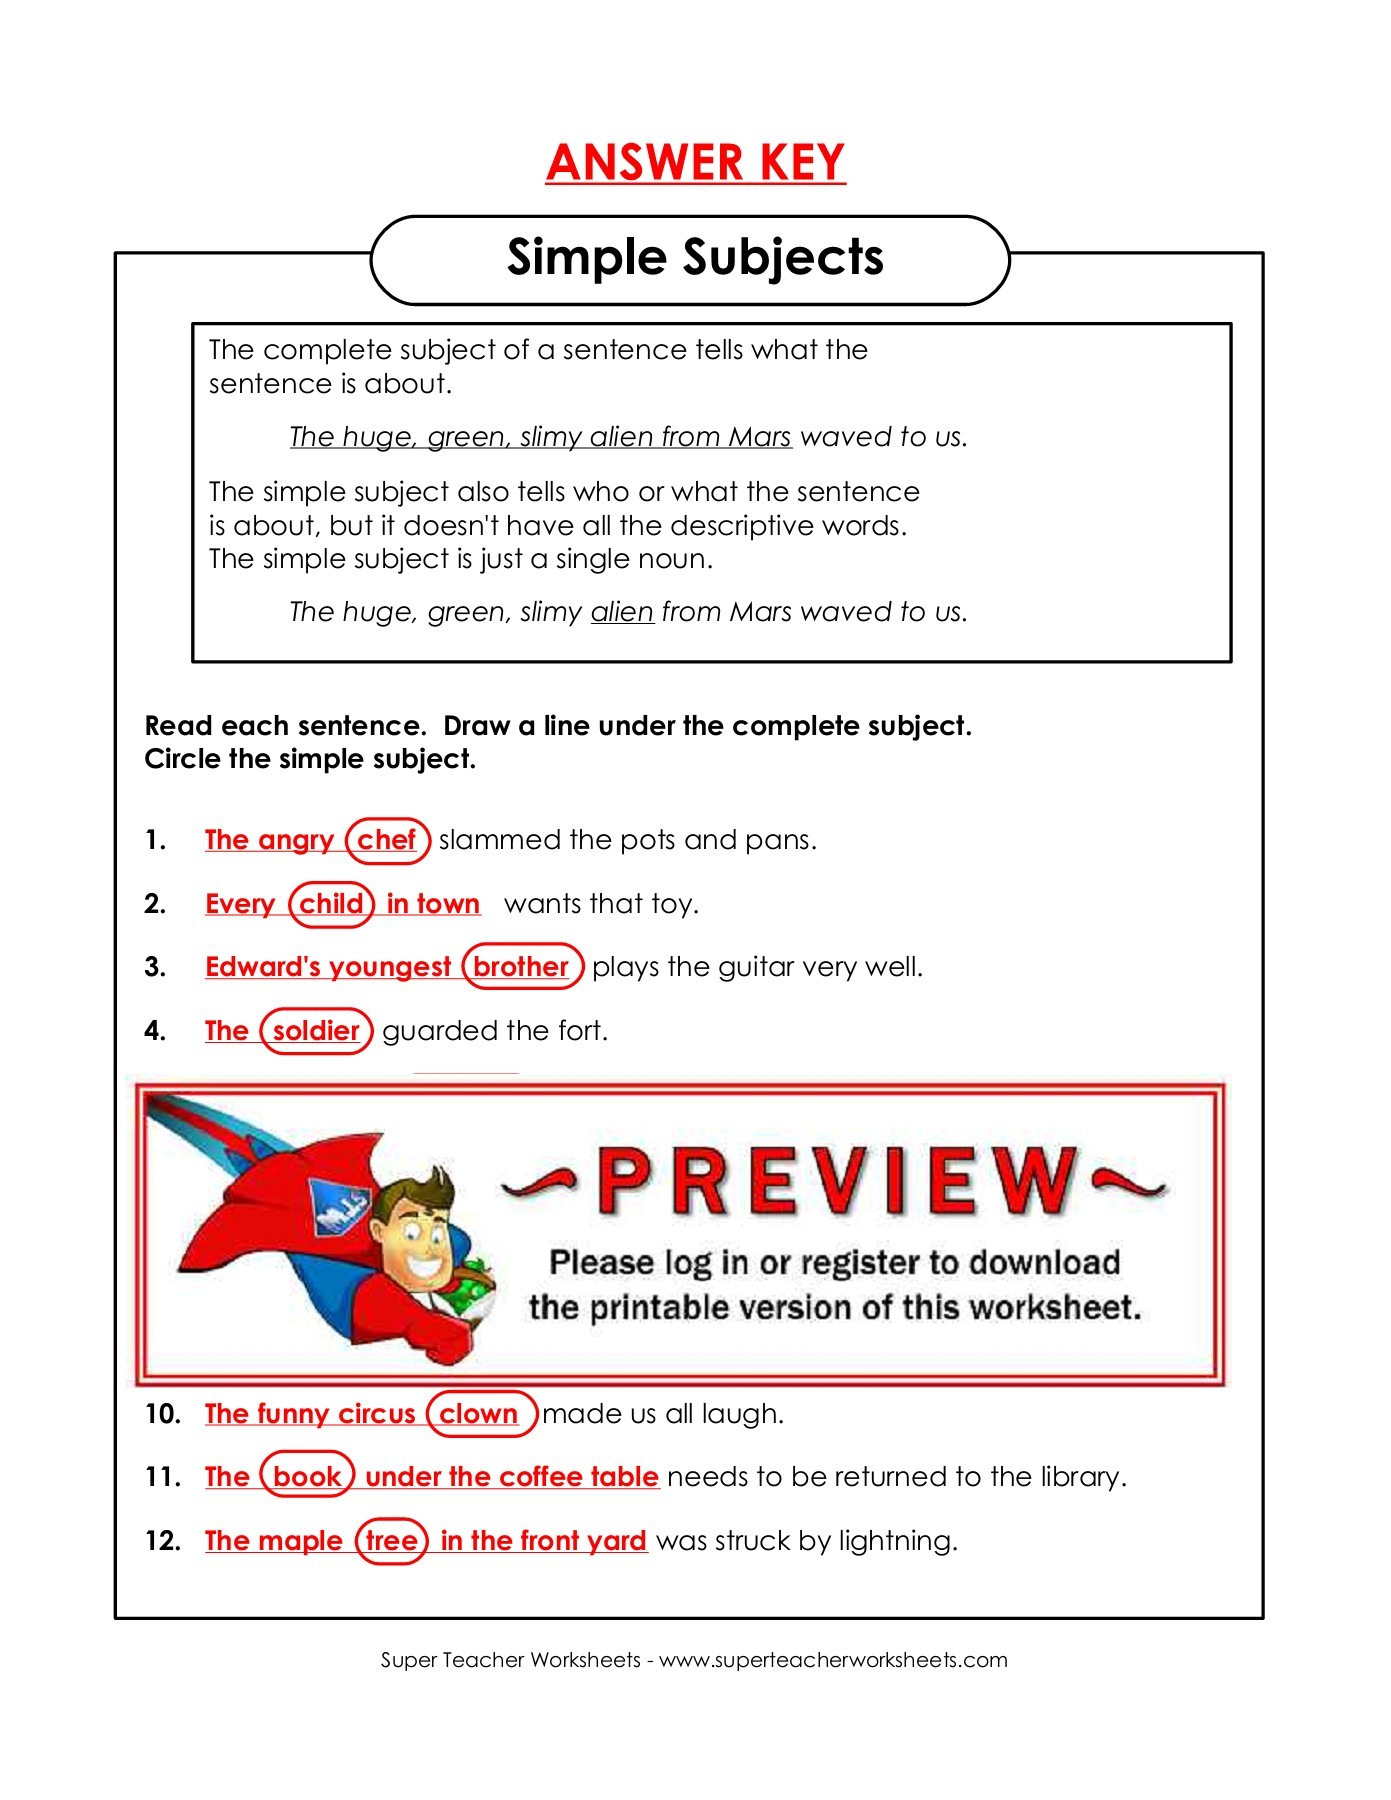 Simple Subjects  Super Teacher Worksheets